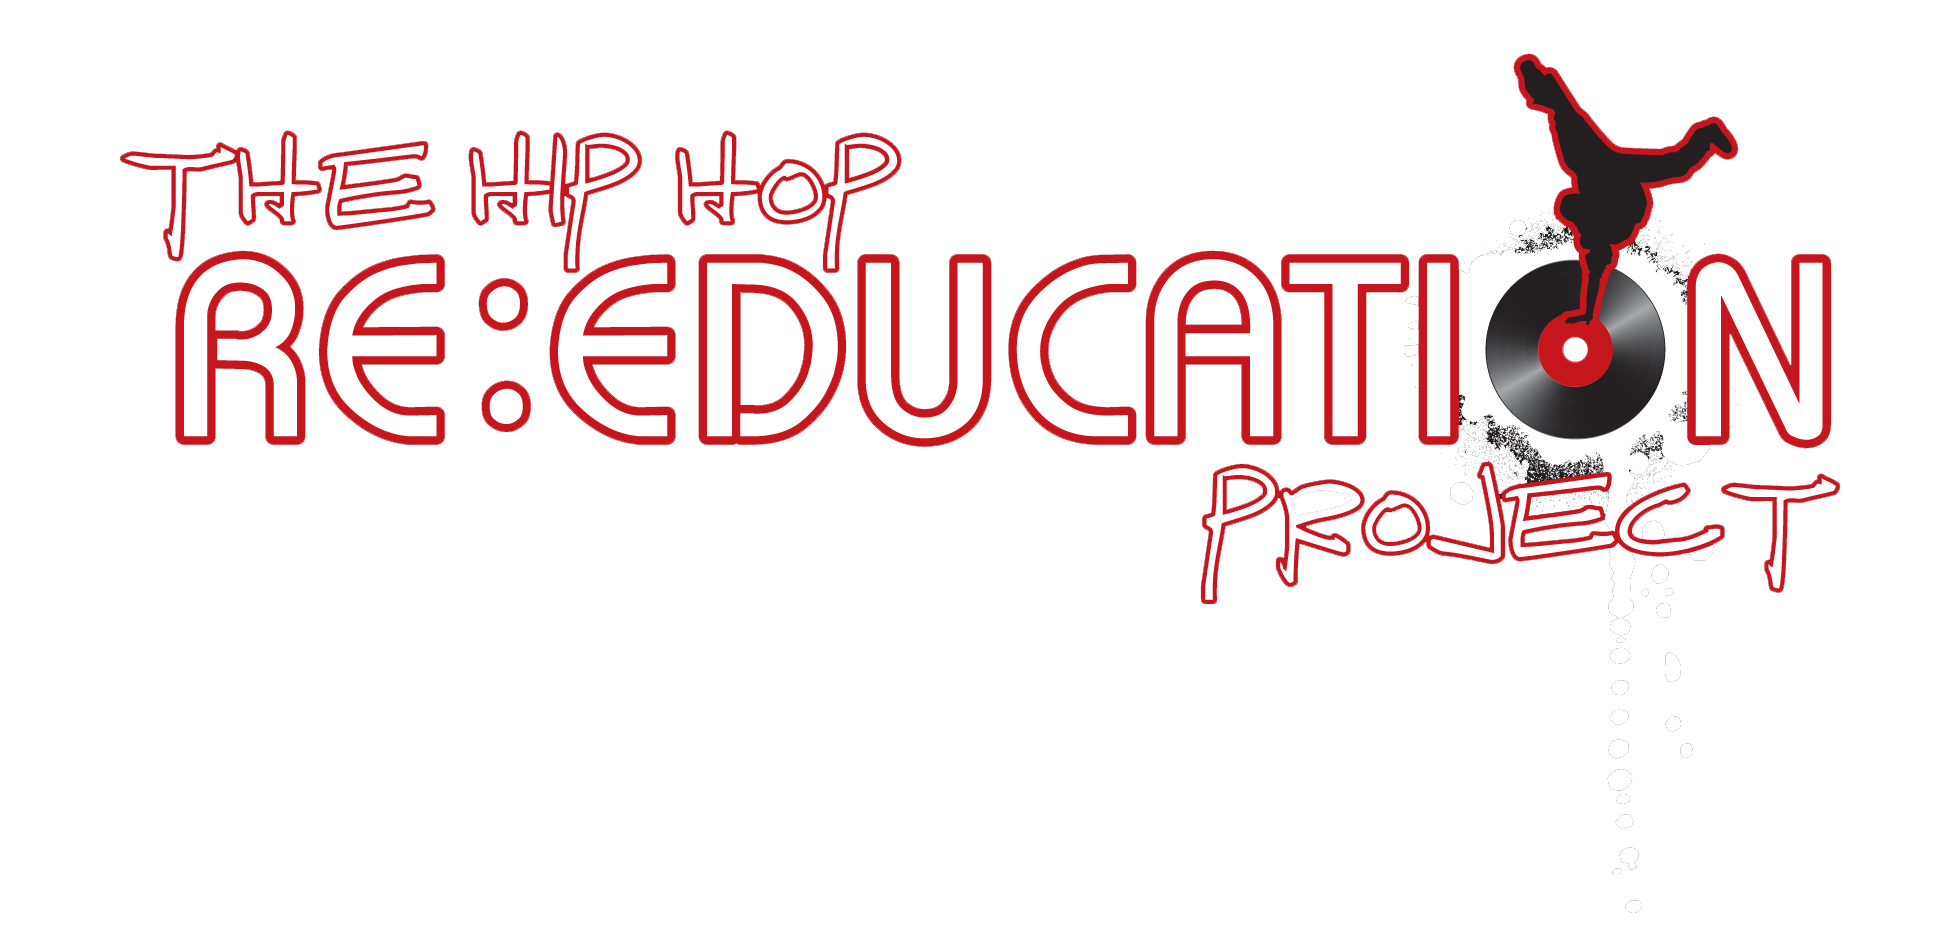 Project reeduction